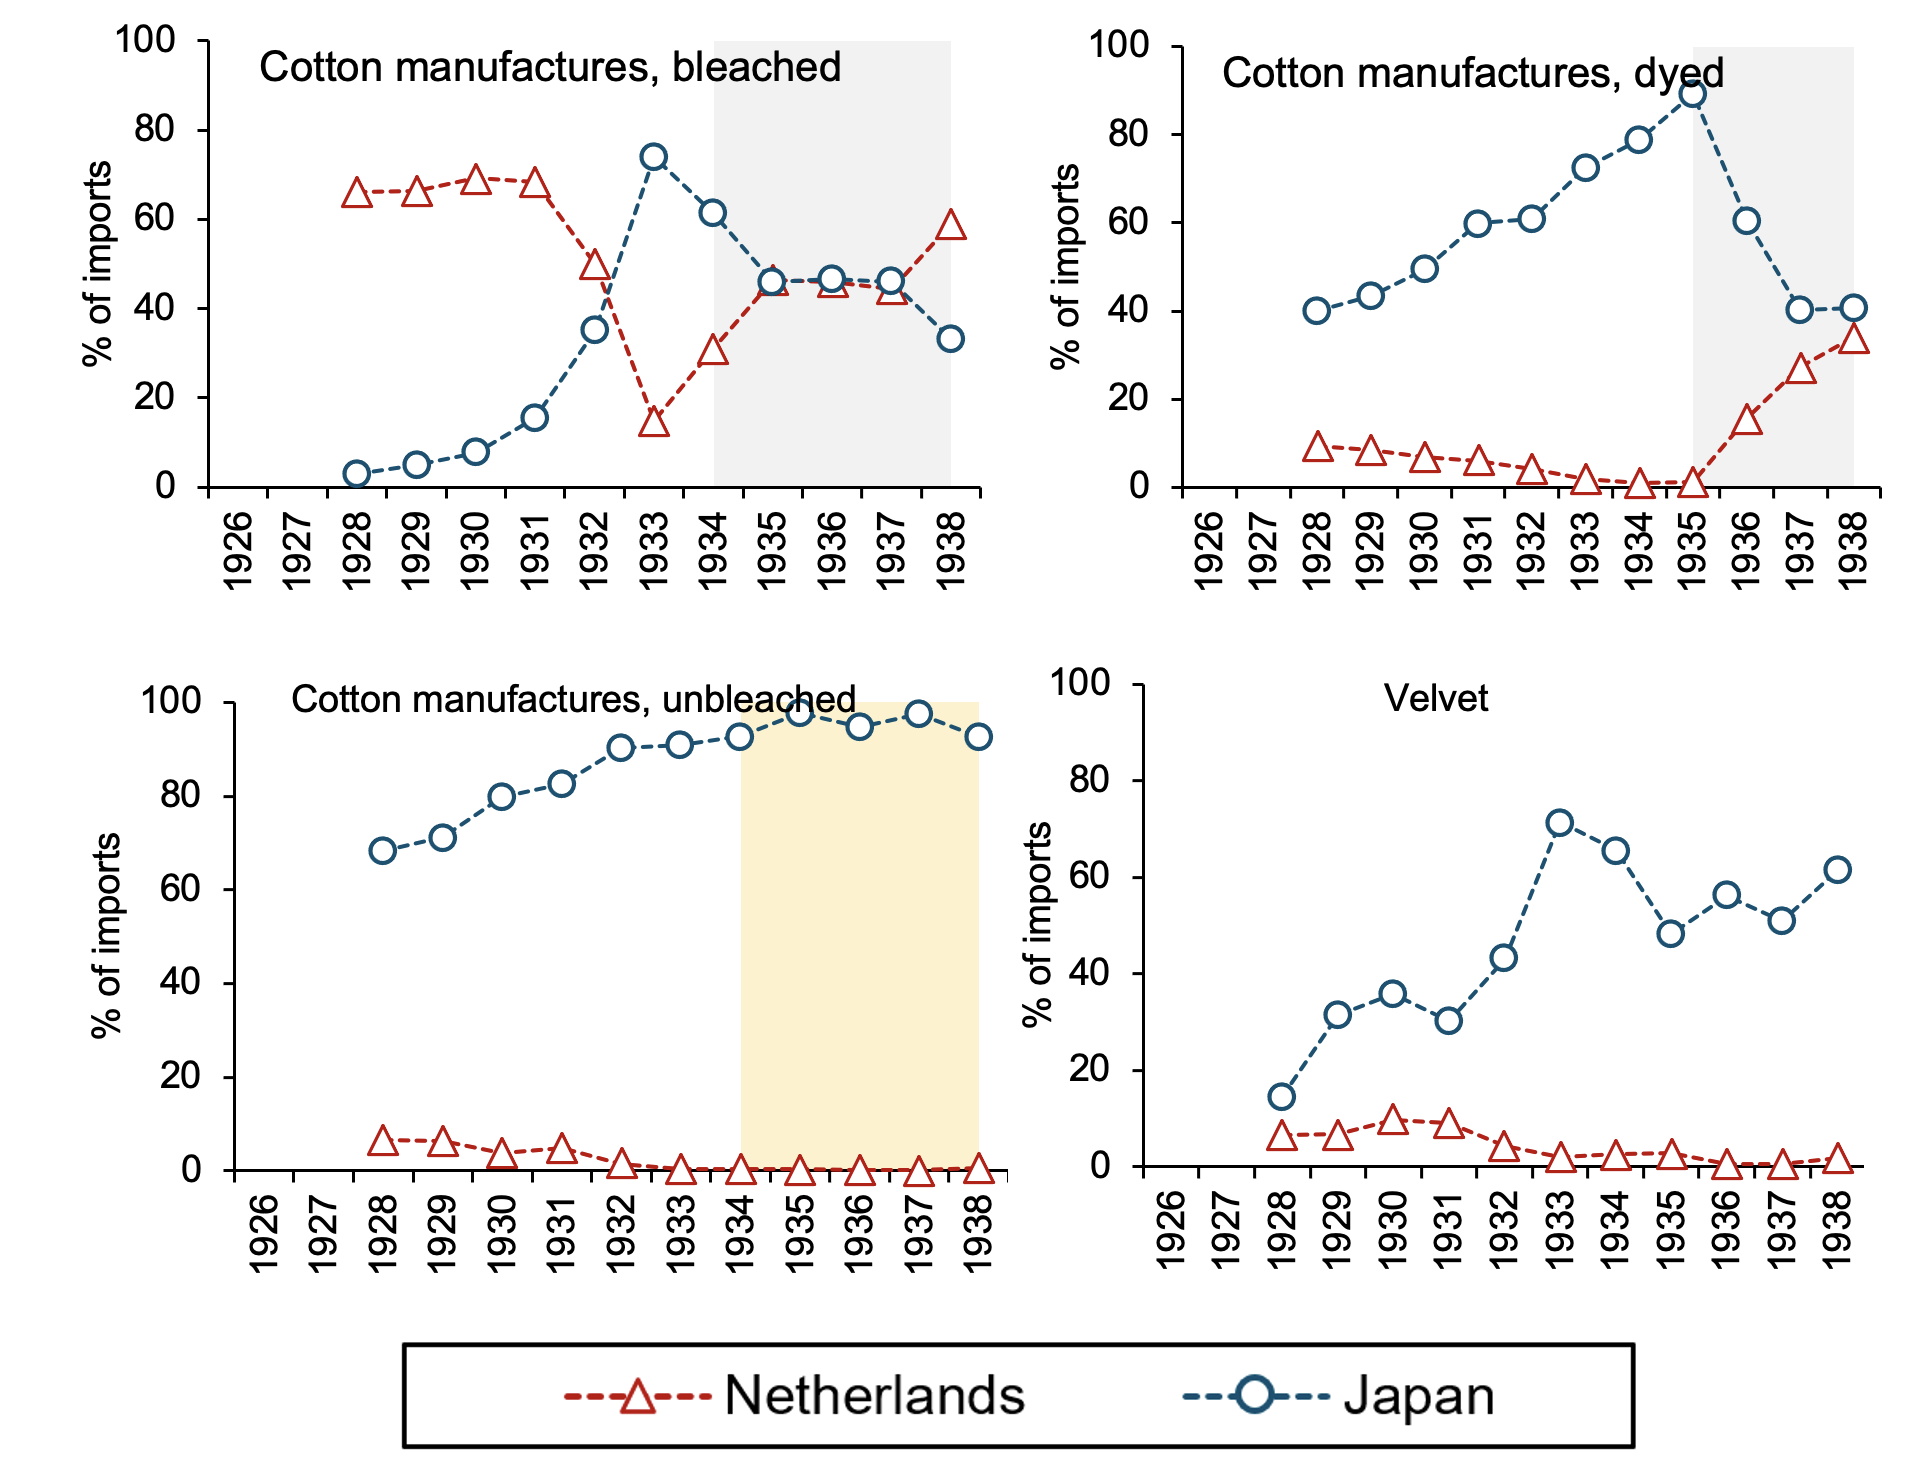 Figure 3 Shares of imports in the Netherlands East Indies from the Netherlands and Japan for textiles with country-specific quotas, general quotas, and without quotas, 1928-1938